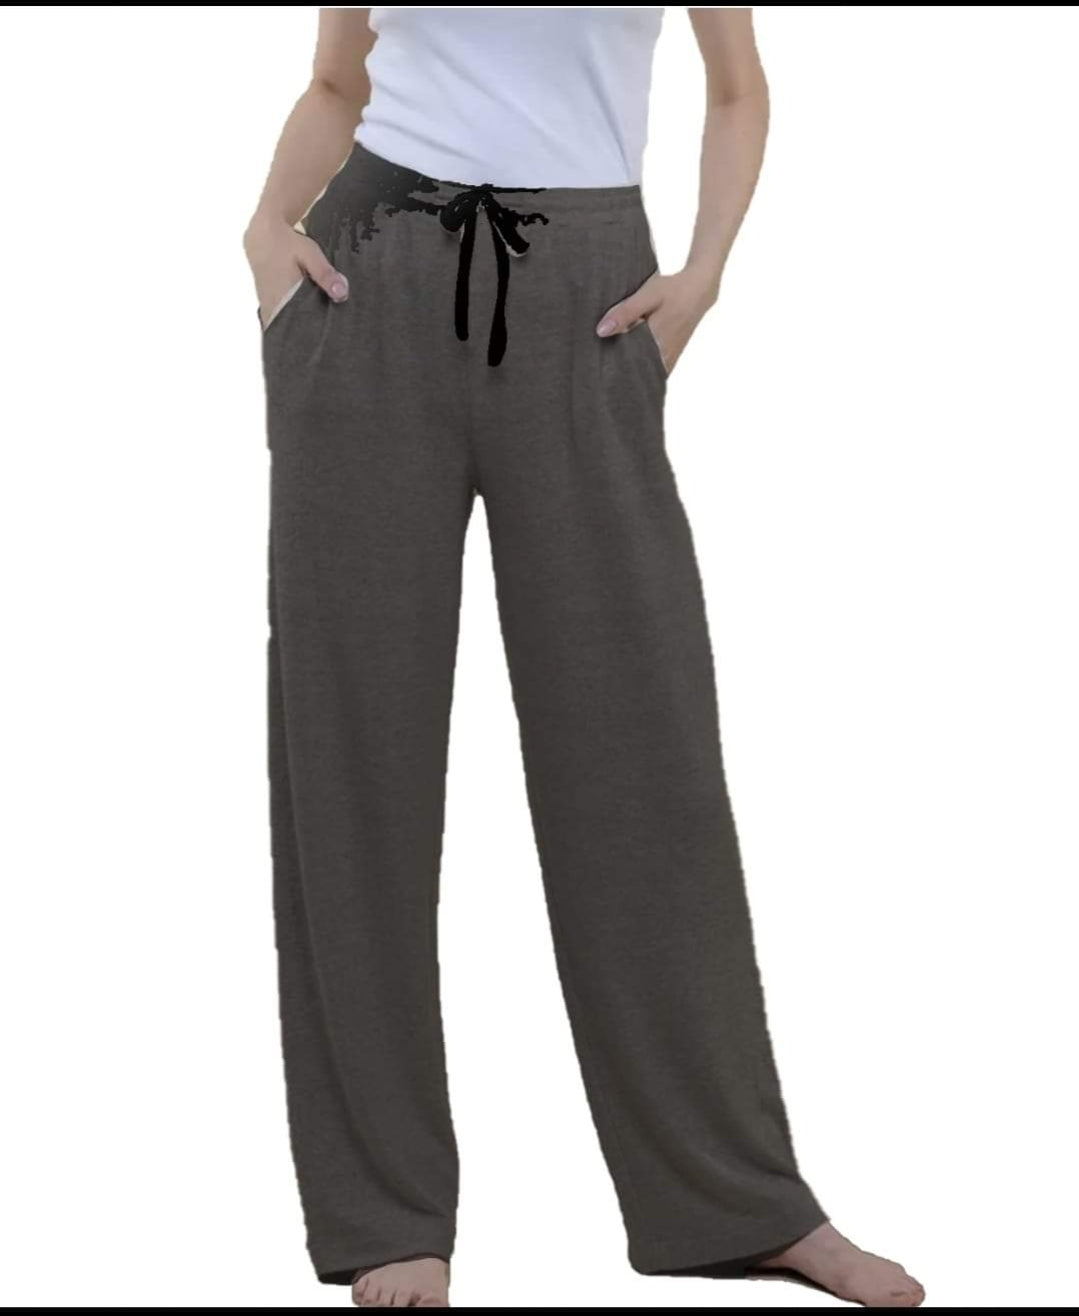 Solid Charcoal Grey Joggers and Lounge Pants